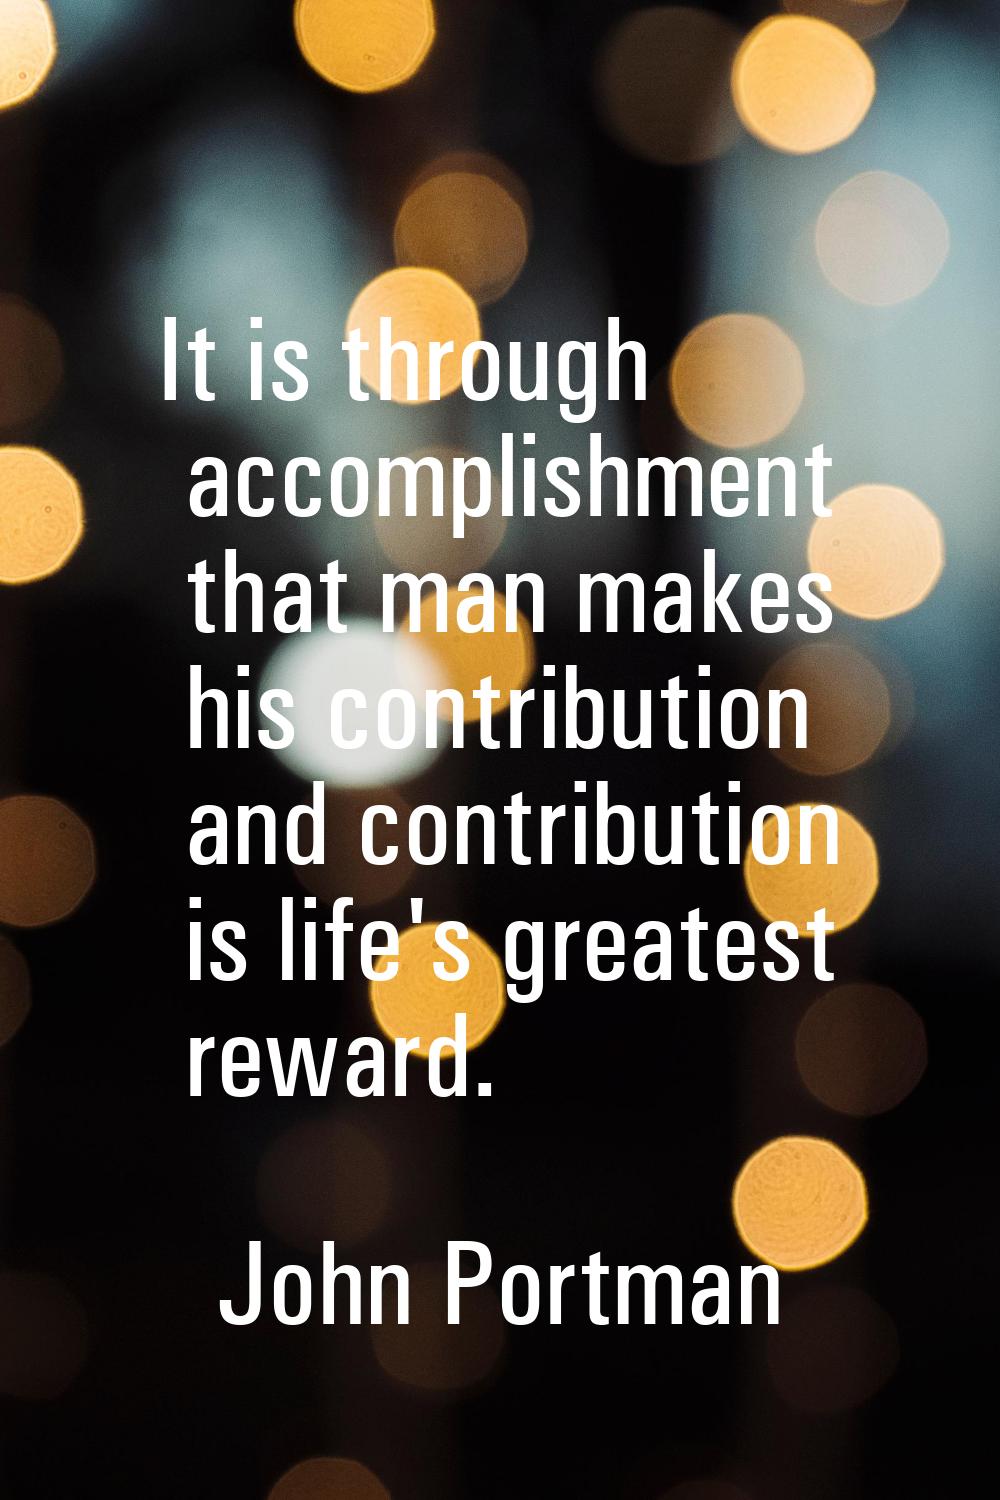 It is through accomplishment that man makes his contribution and contribution is life's greatest re